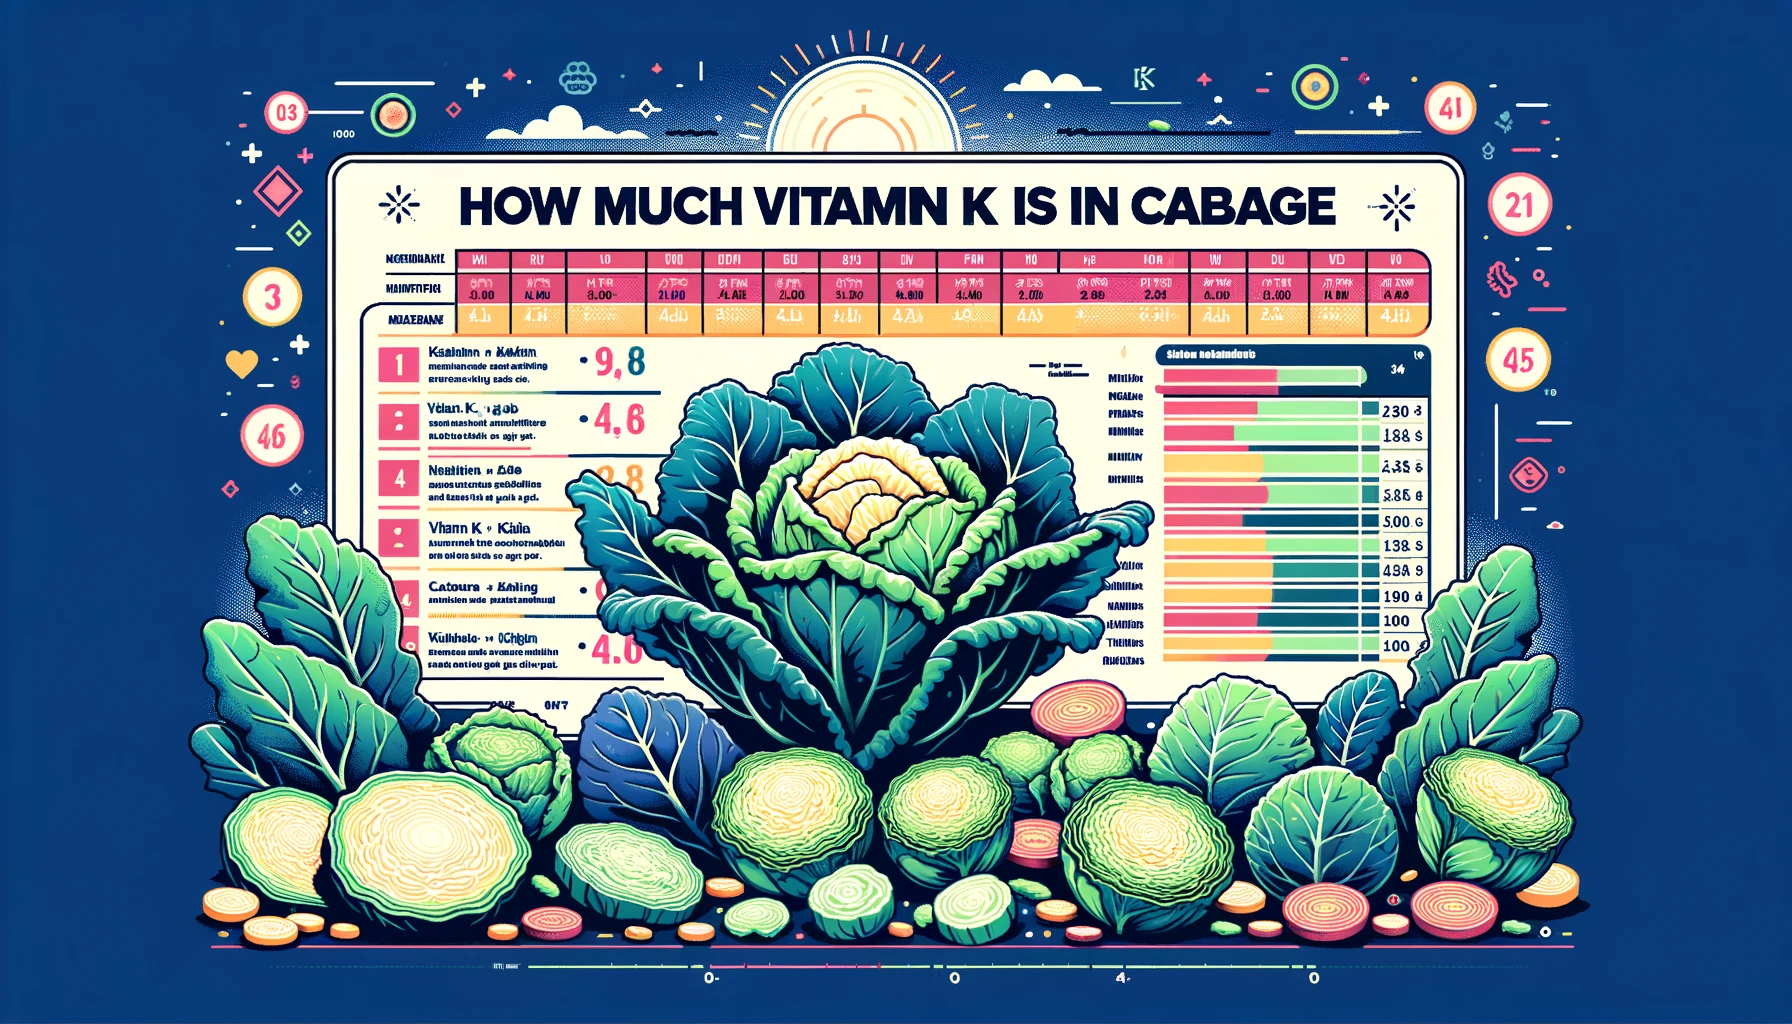 How Much Vitamin K is in Cabbage